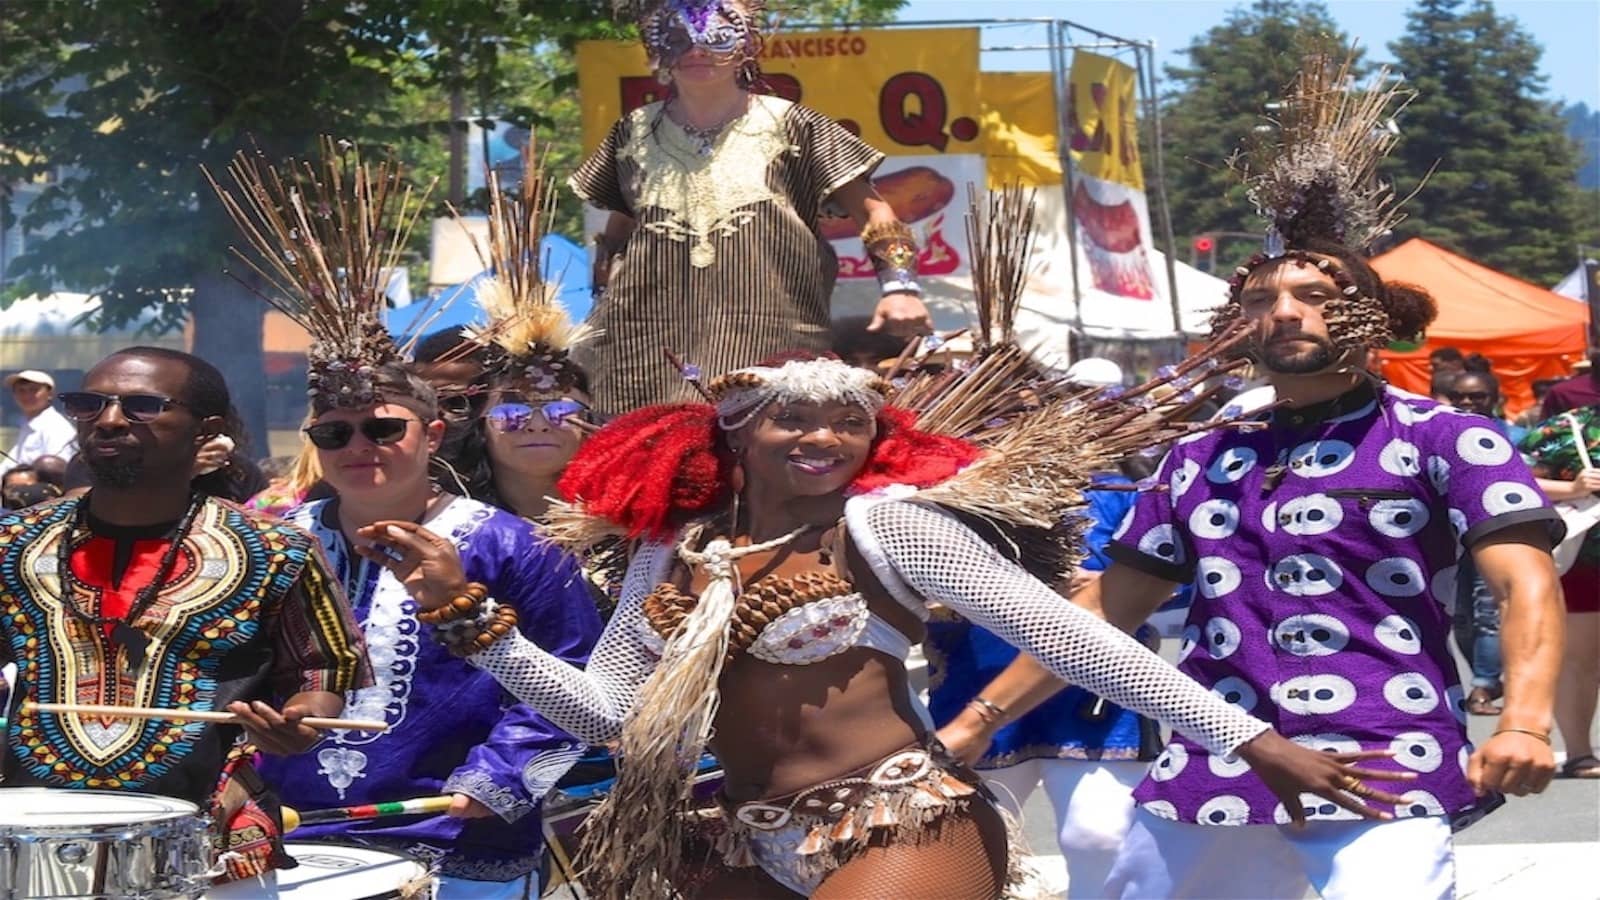 berkeley juneteenth_sf bay area things to do_800x450